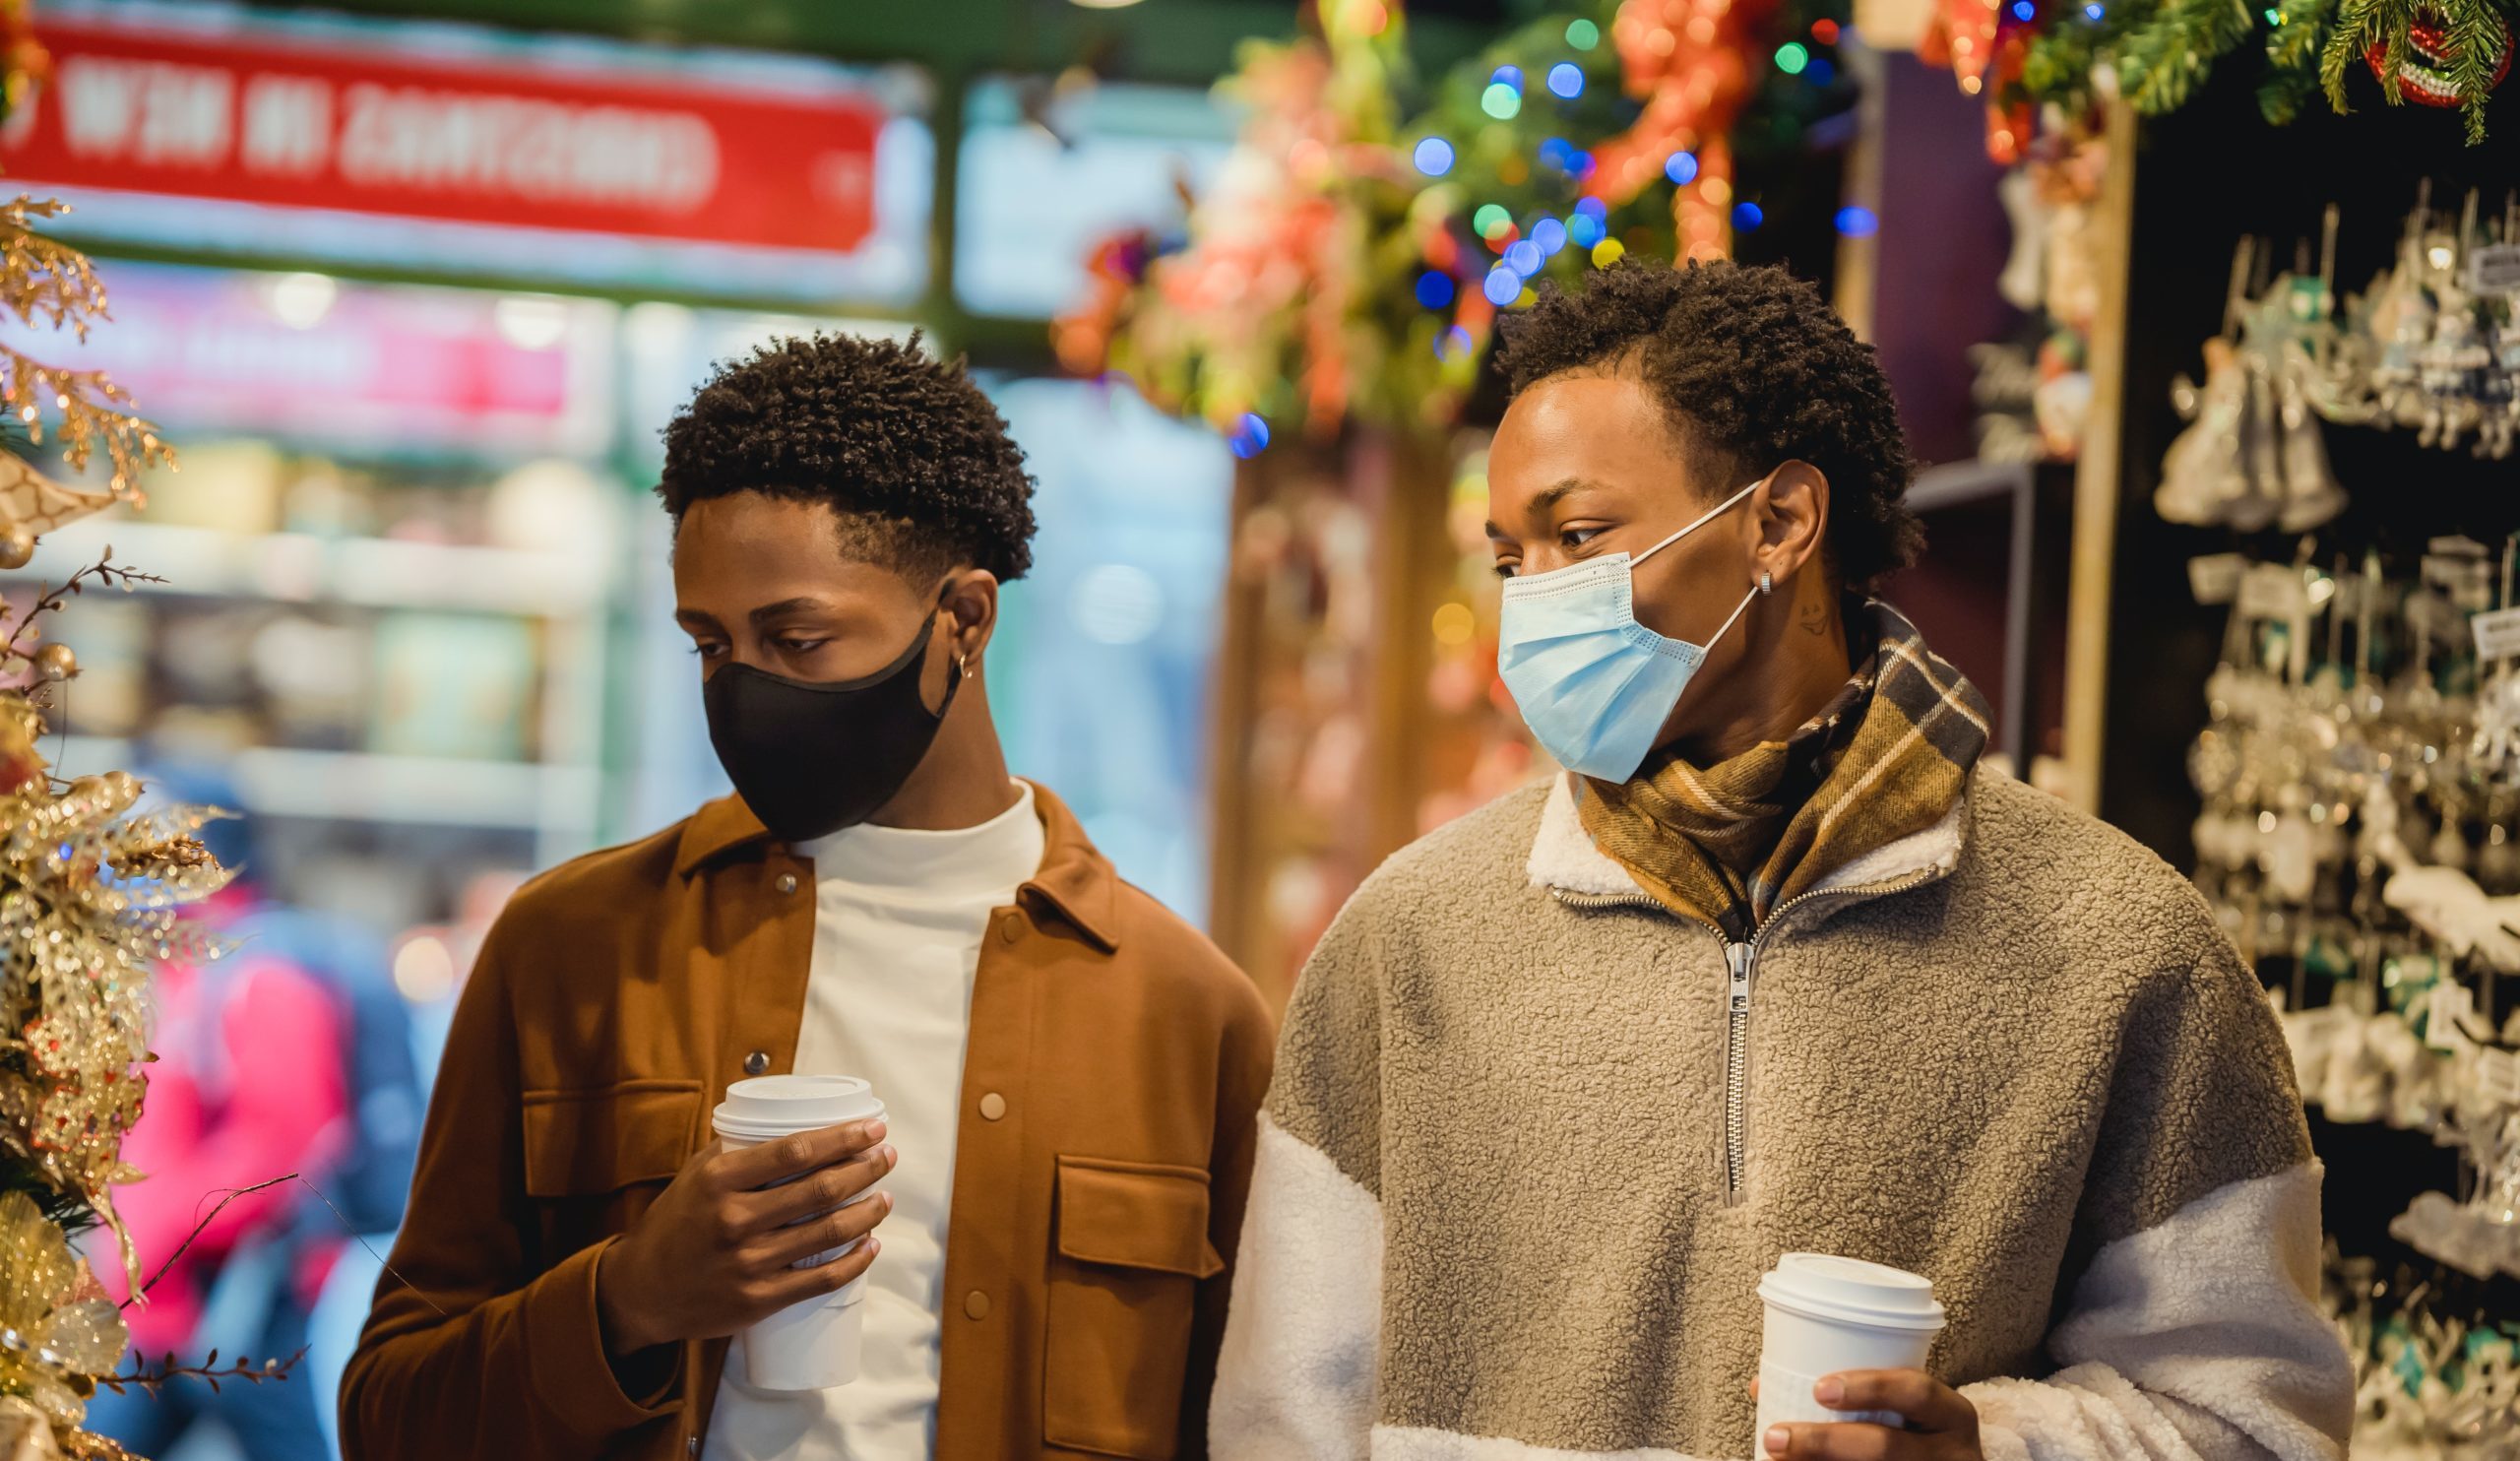 Two men holiday with face masks on shopping in store